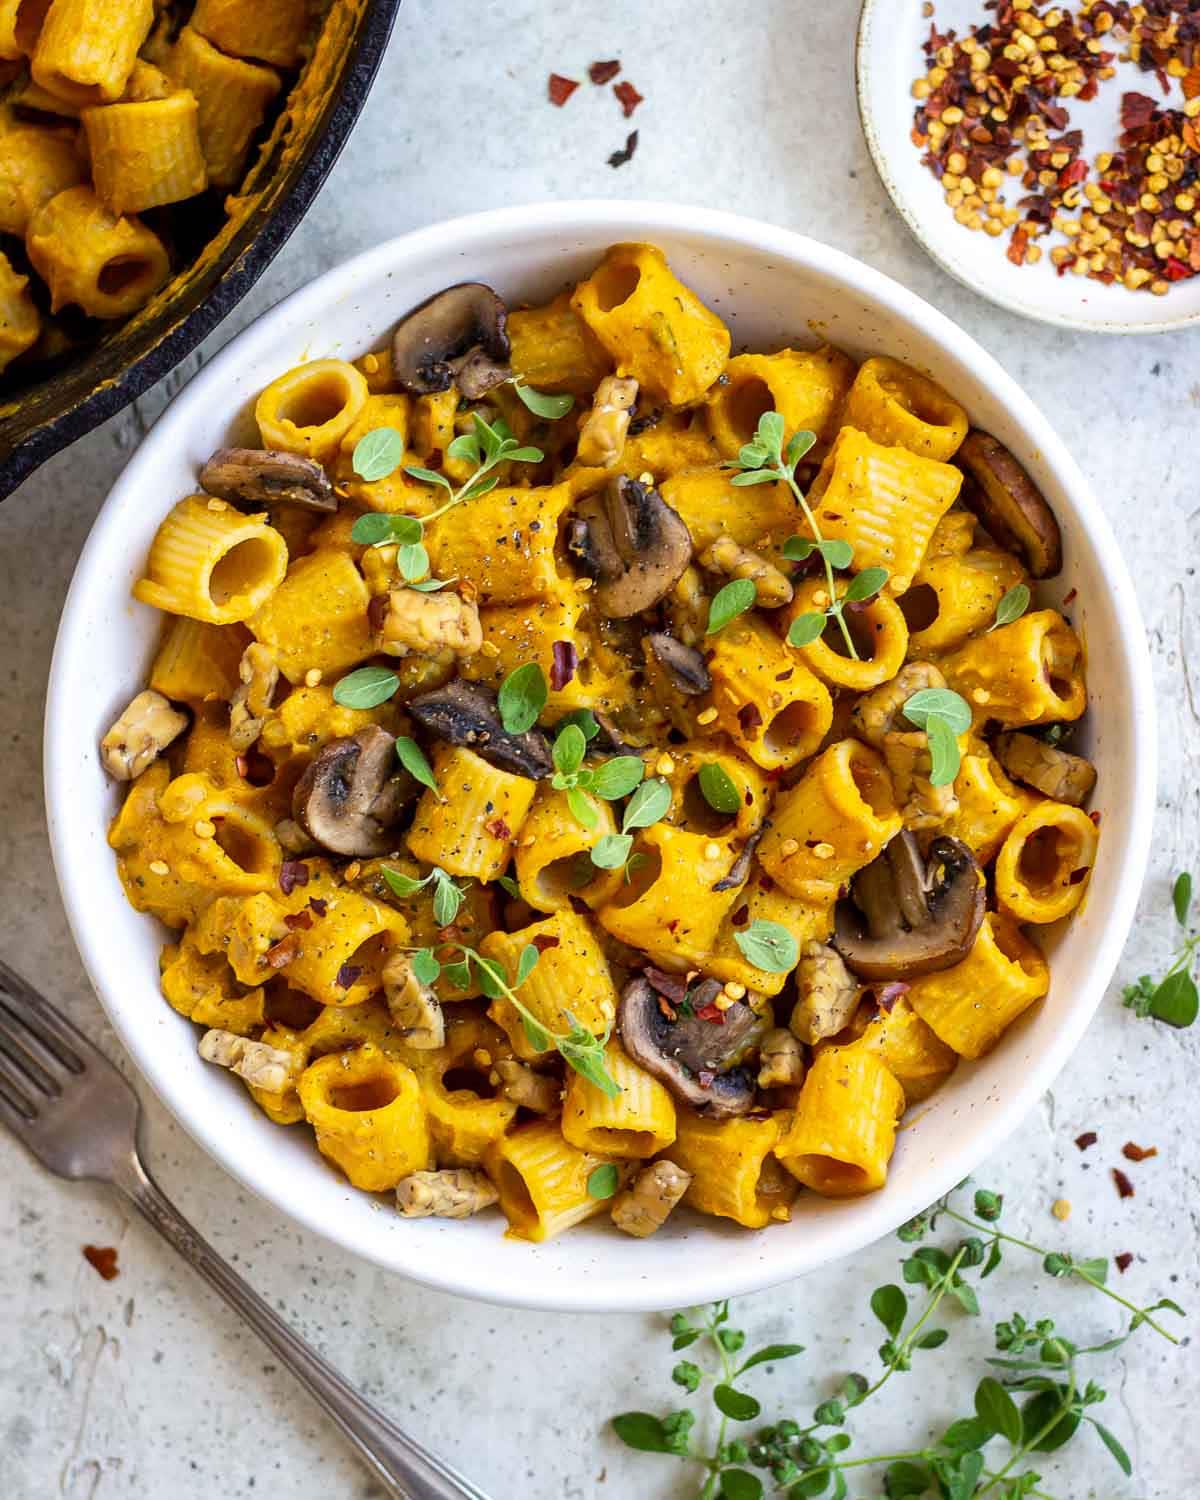 Cheesy plantbased pasta with mushrooms and tempeh.